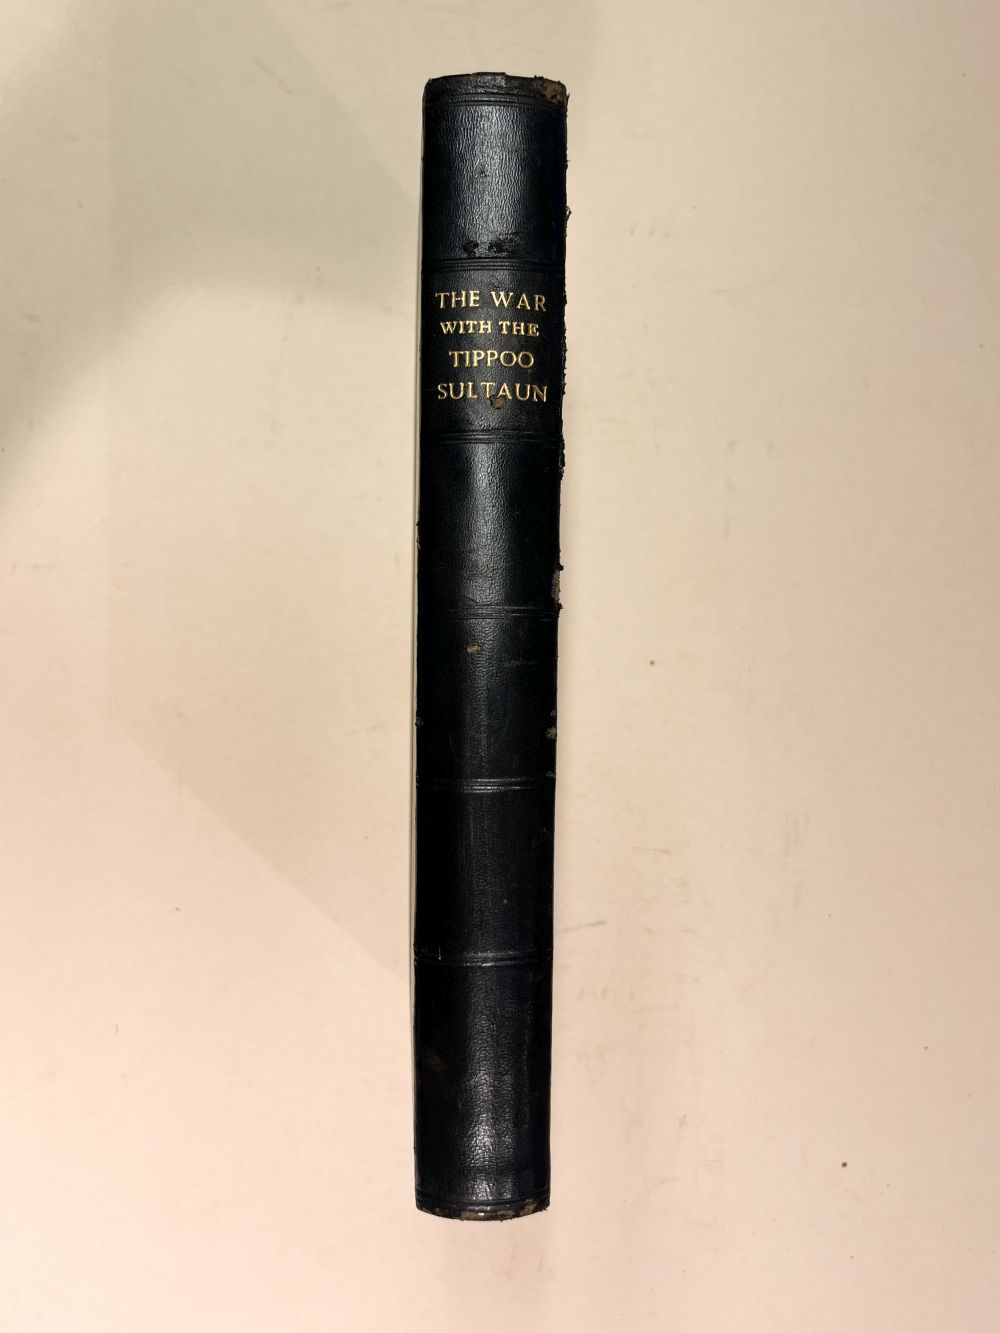 East India Company. Copies and Extracts of Advises to and from India..., 1799-1800 - Image 3 of 8